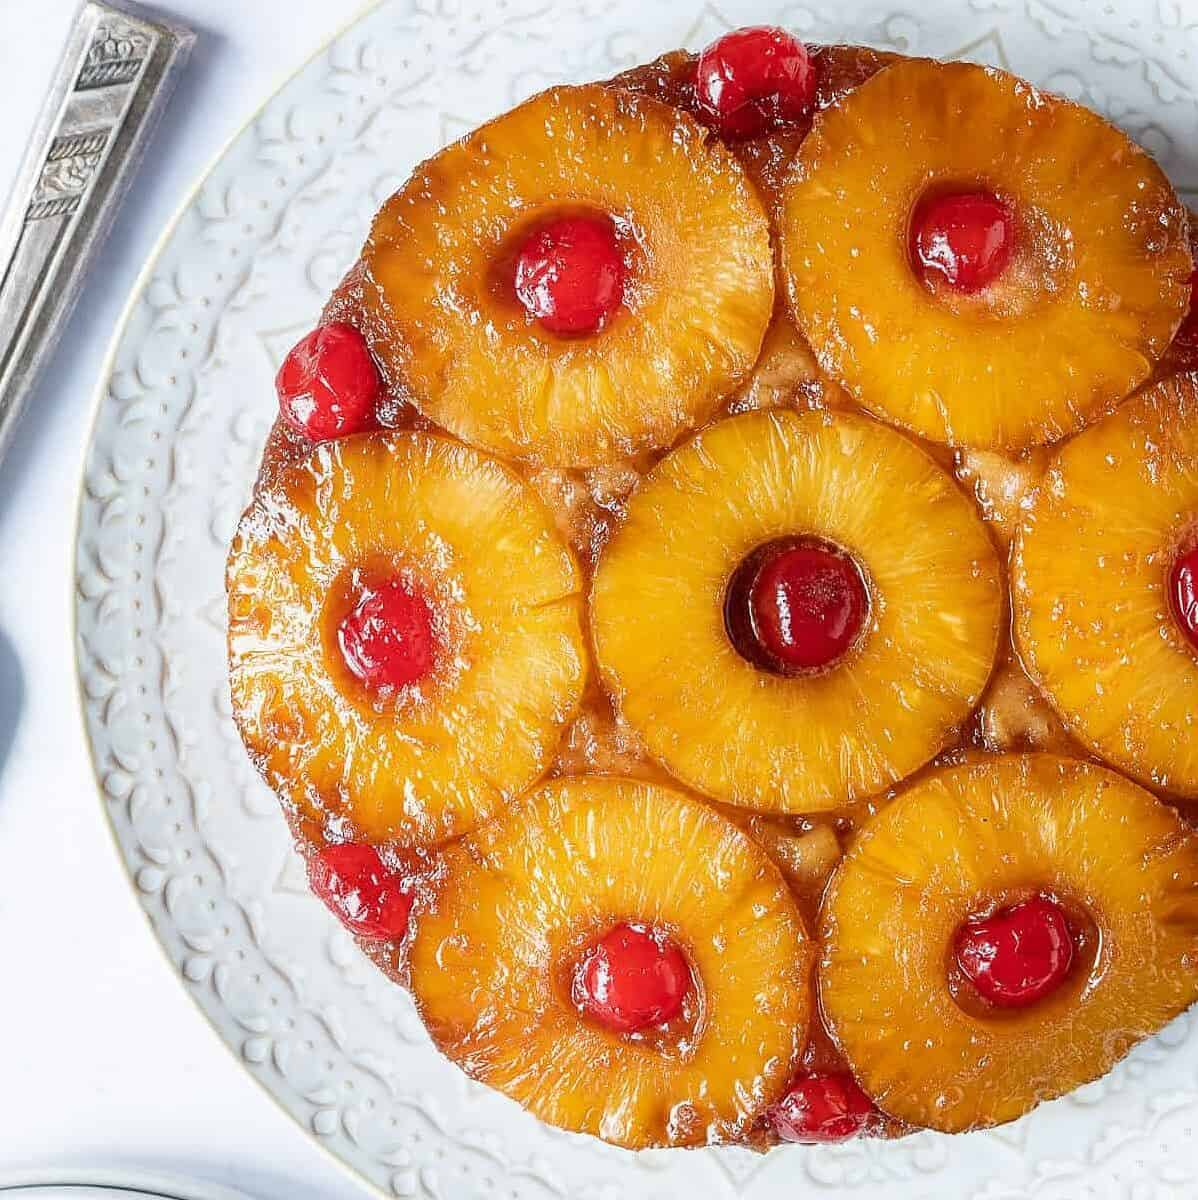  The tropical flavors of juicy pineapple and sweet coconut pair perfectly in this cake.